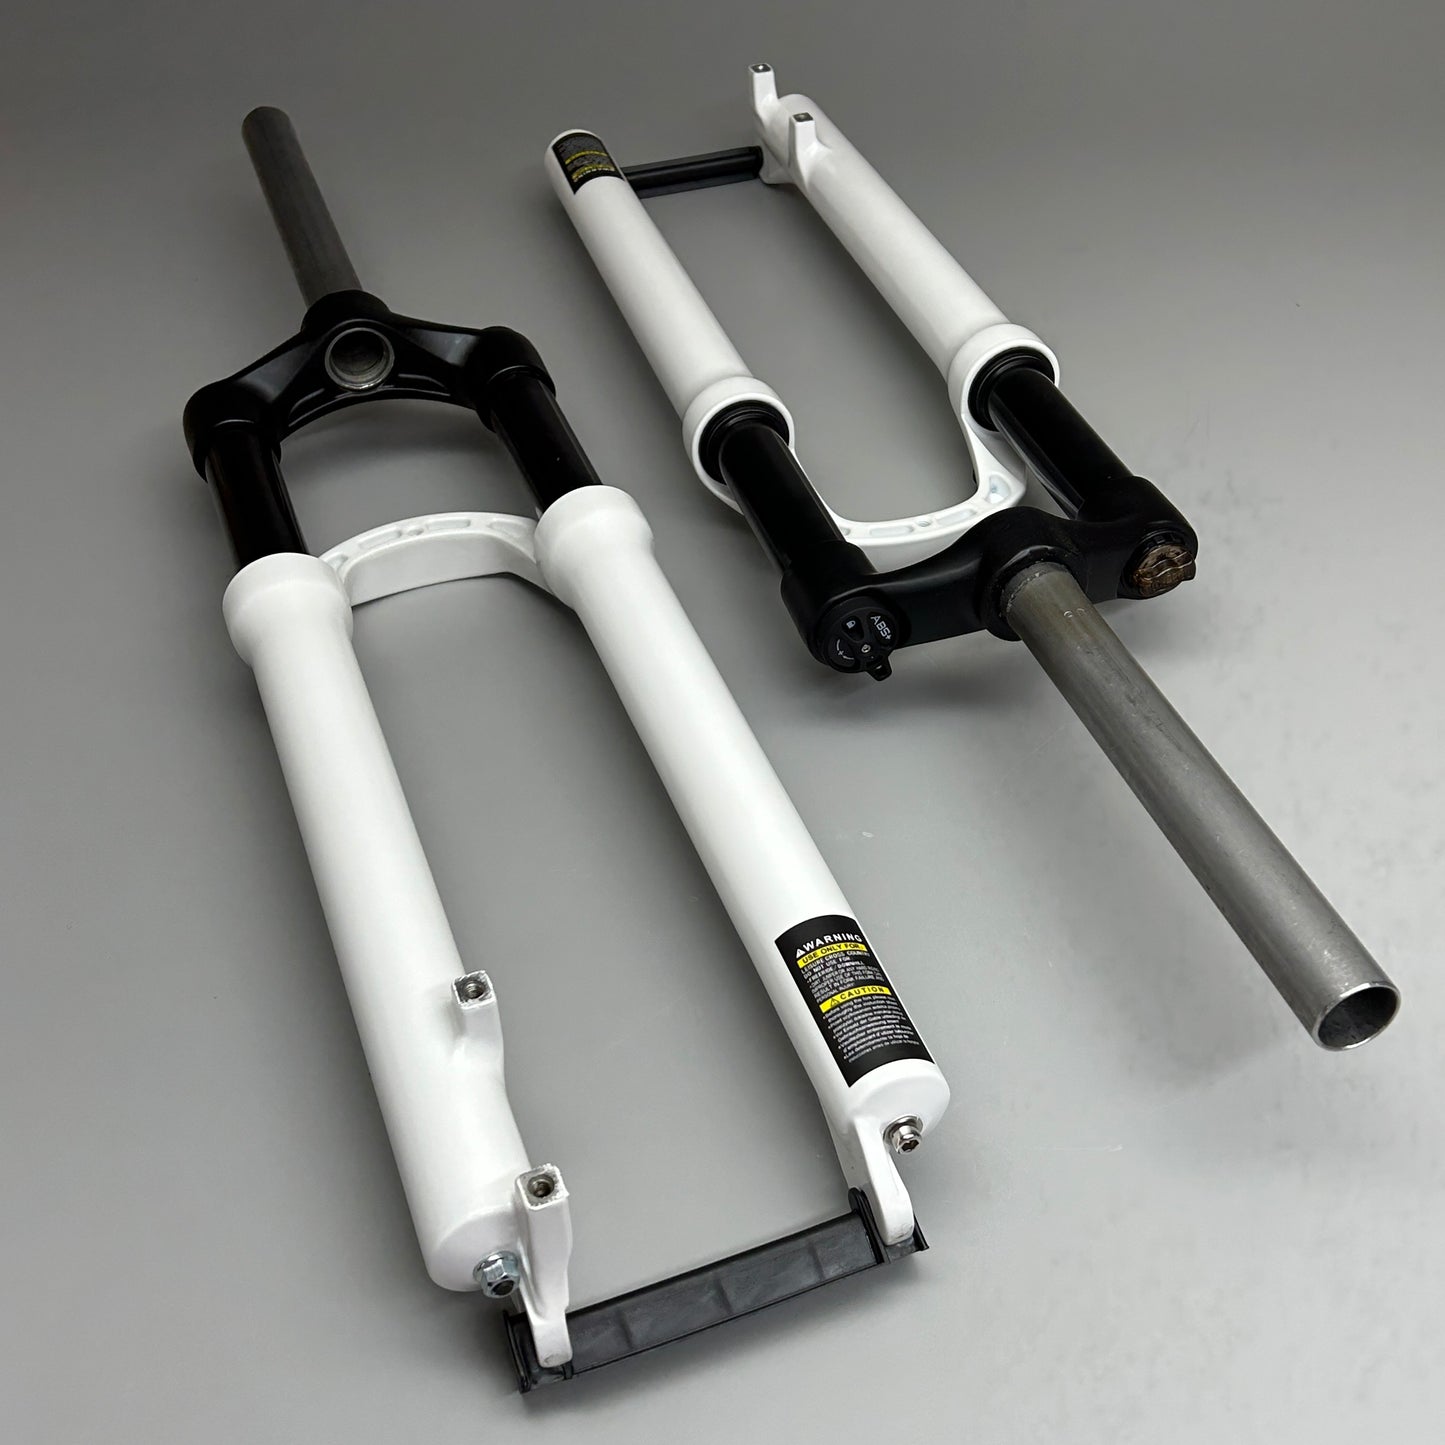 UNBRANDED 2-PACK! Mountain Bike Suspension Forks 20in (New)